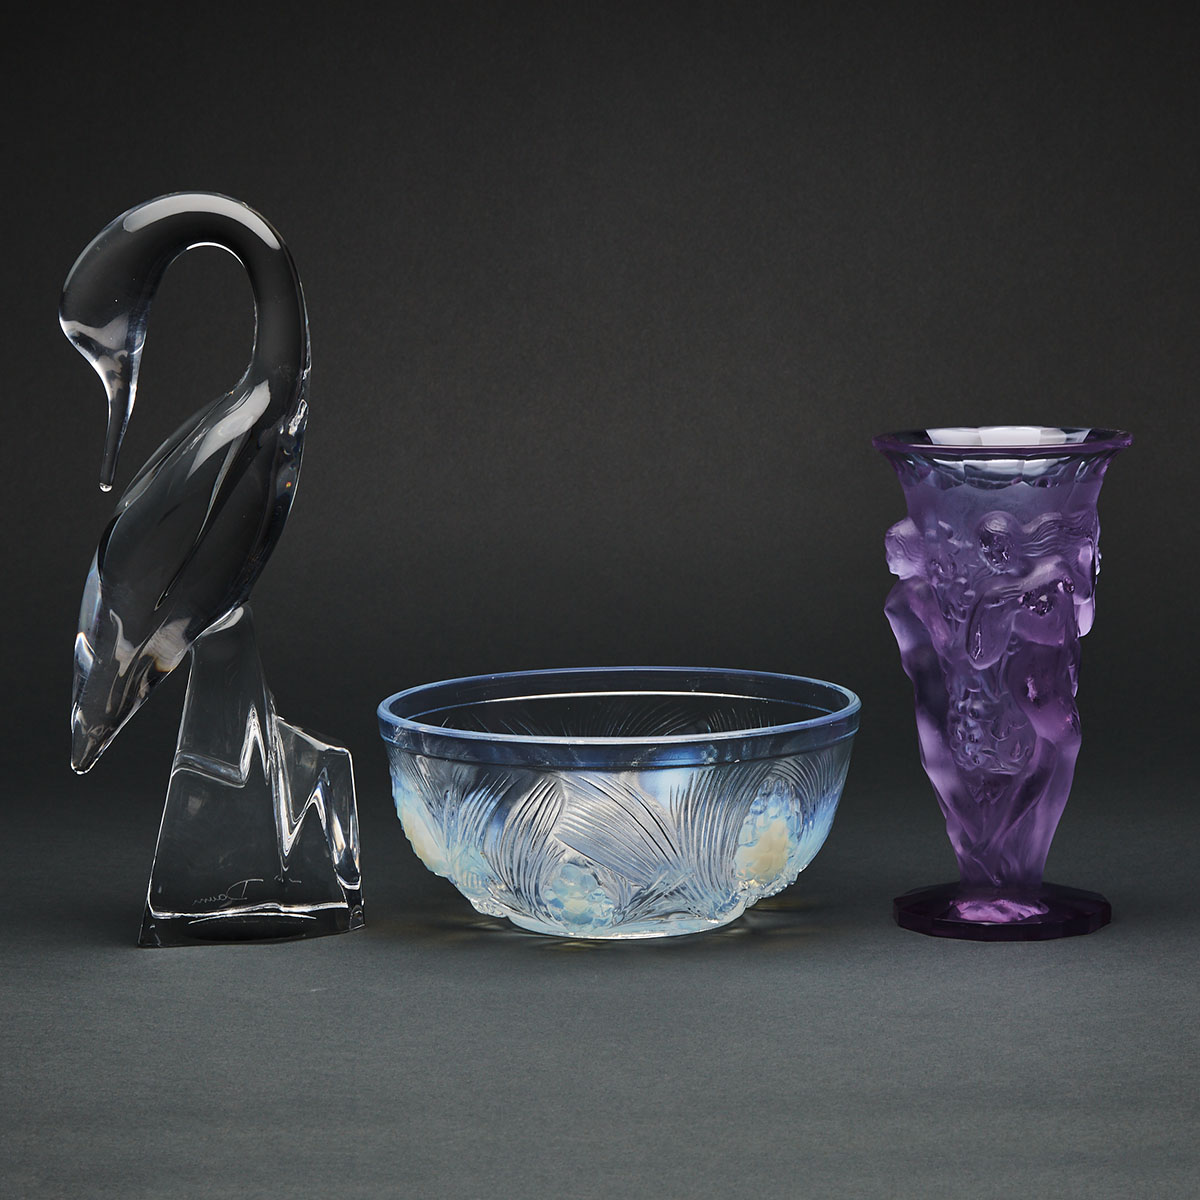 Daum Glass Bird Sculpture, Jobling Moulded Opalescent ‘Fircone’ Bowl and Moser-Type Moulded and Frosted Vase, 20th century